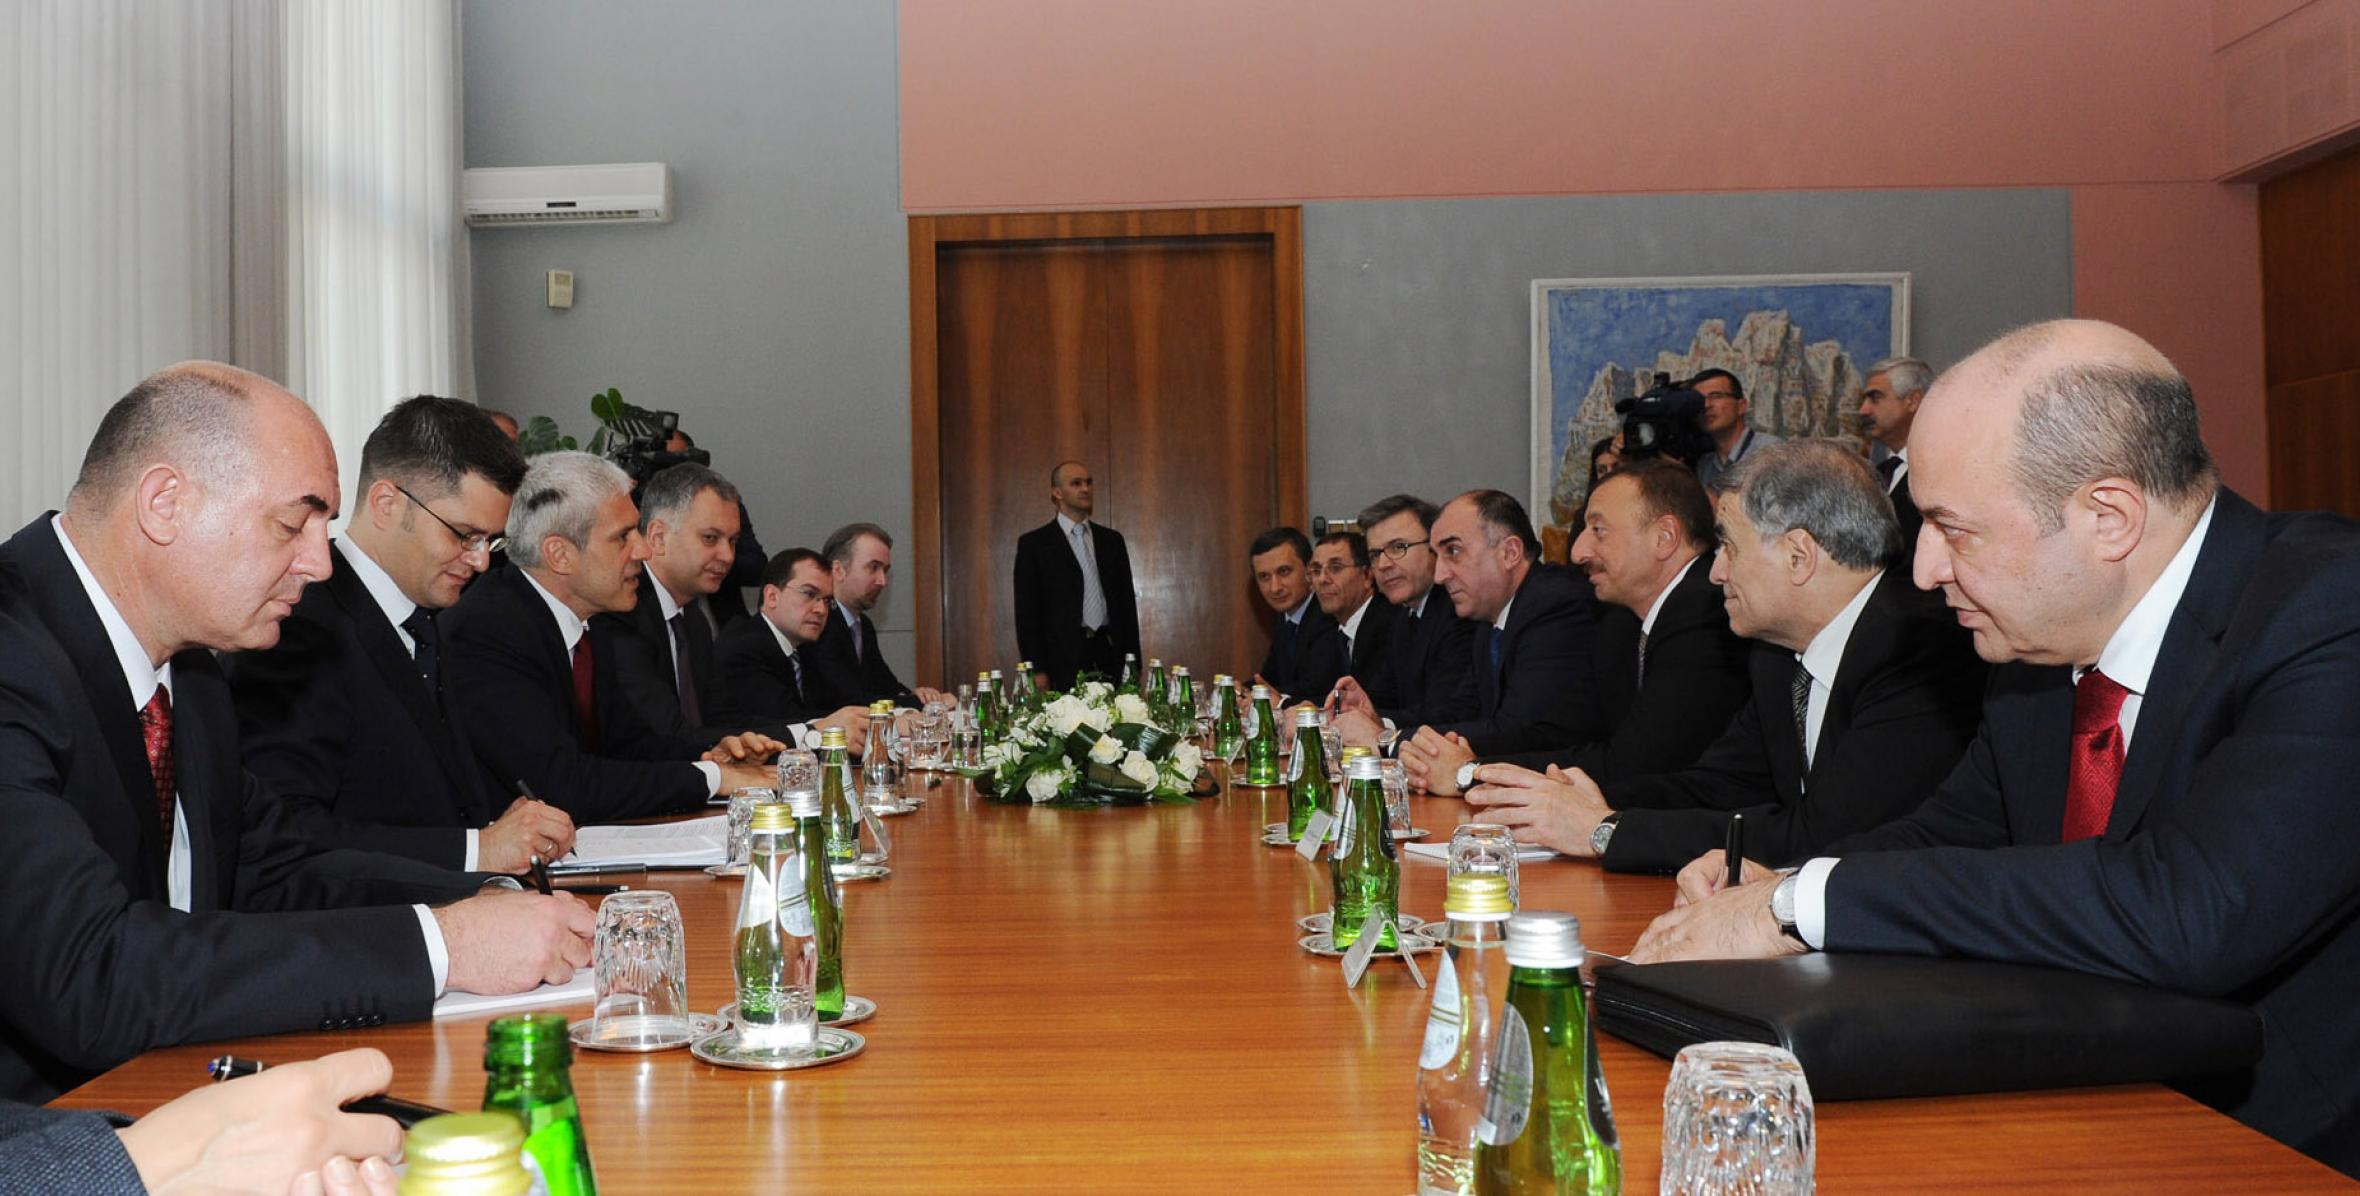 Negotiations of Ilham Aliyev and Boris Tadic were held in an expanded format with the participation of delegations